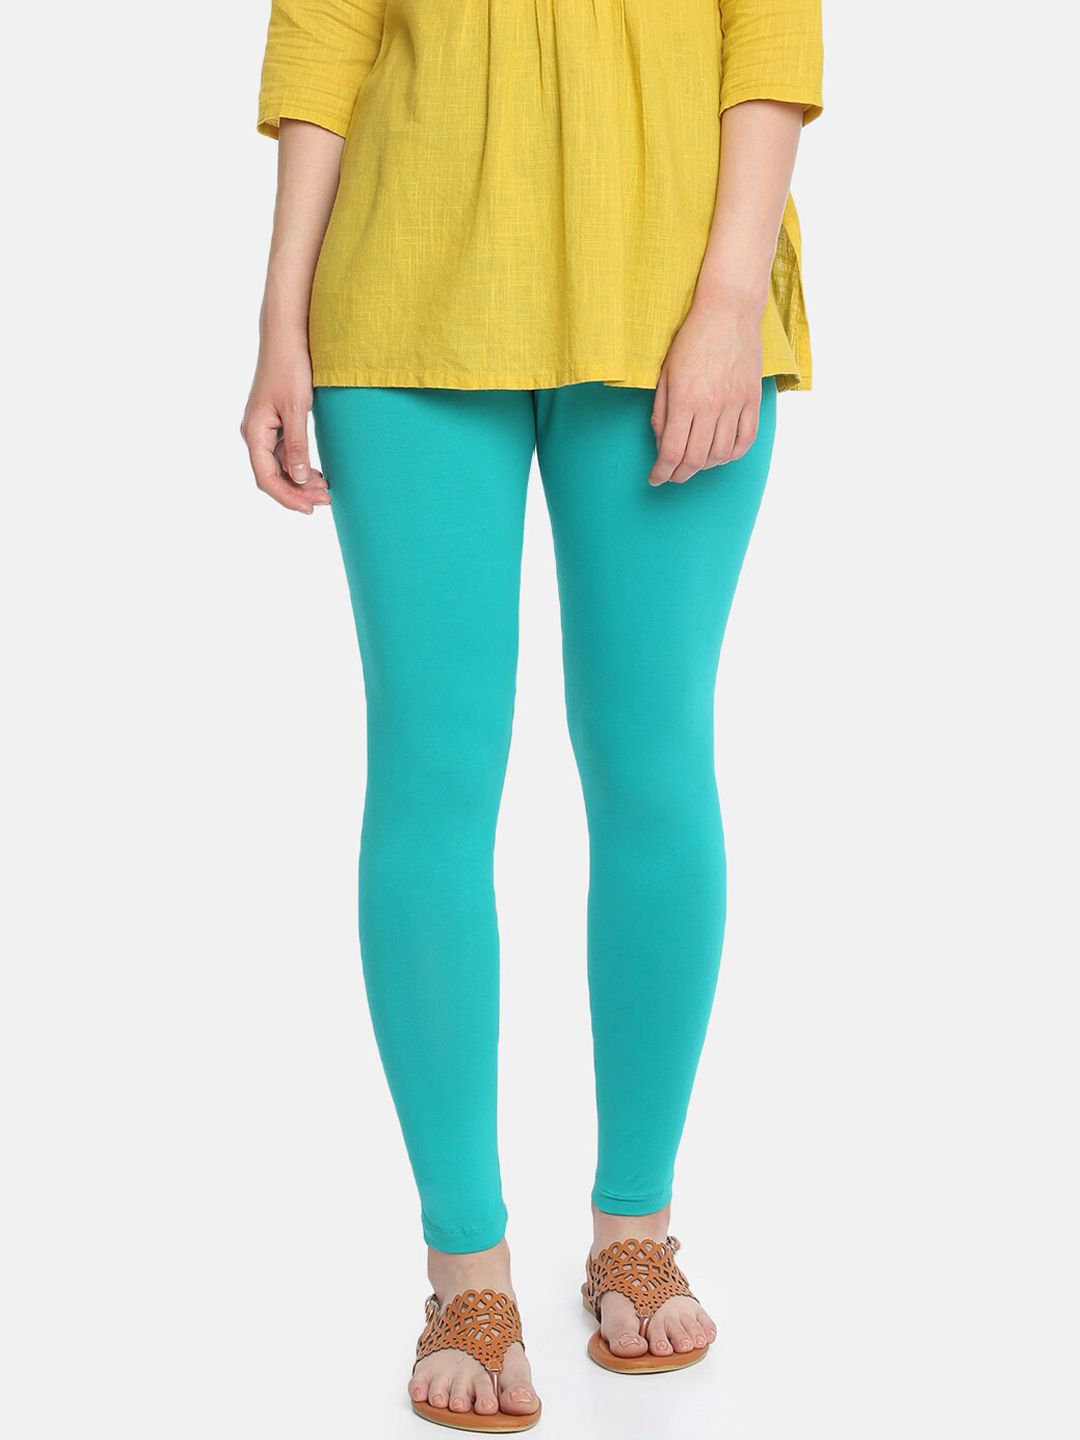 Dollar Missy Women Turquoise Blue Solid Ankle-Length Leggings Price in India